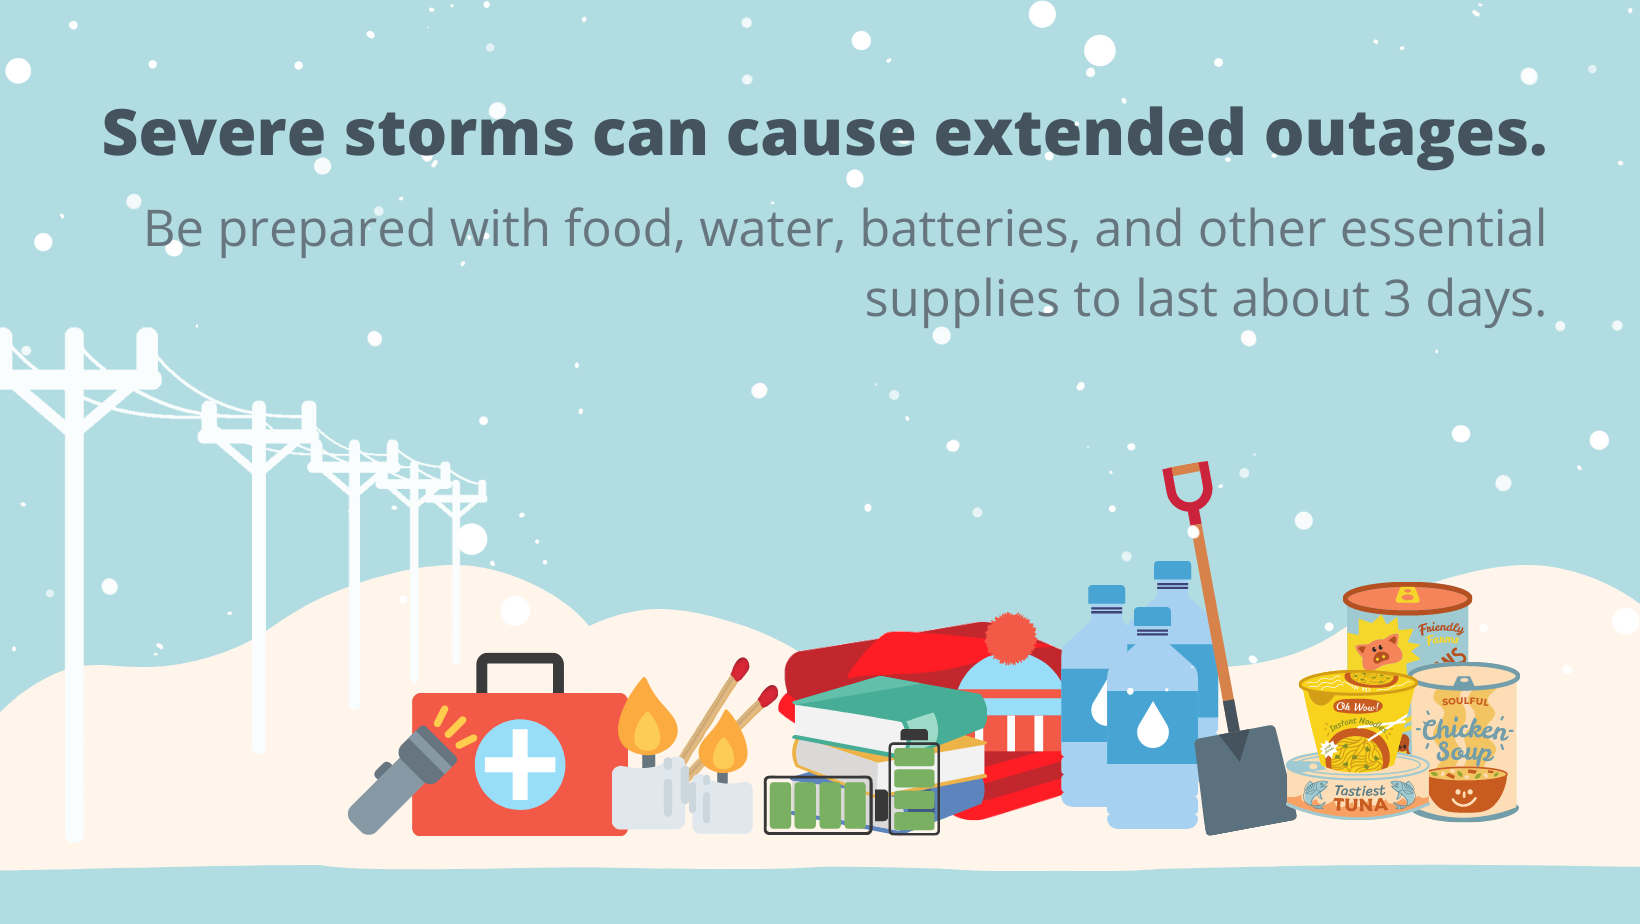 winter storm supplies, first aid kit, flash light, non-perishable food, shovel, water, winter background with power lines